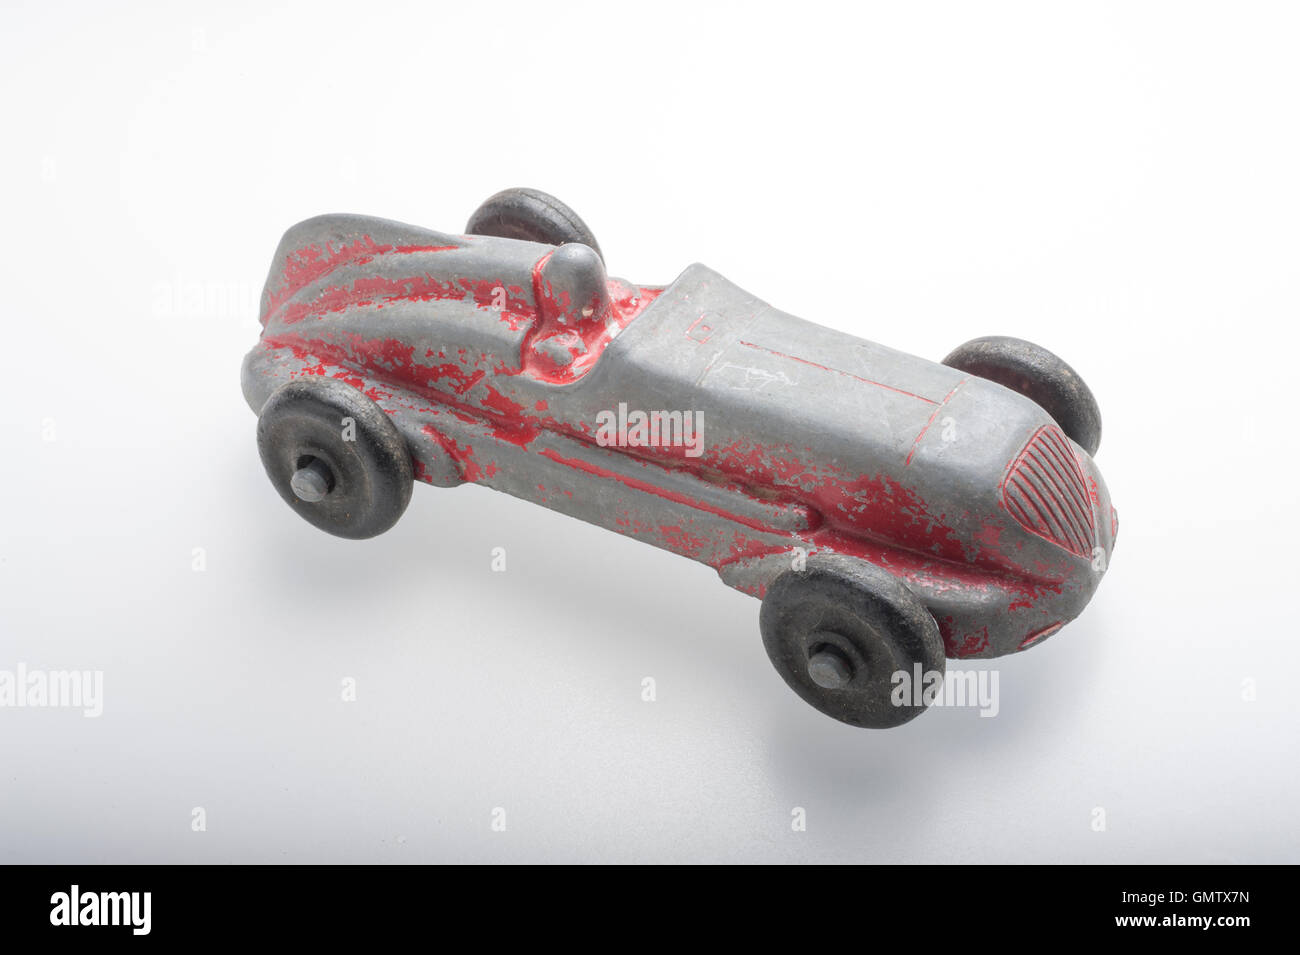 steel toy cars